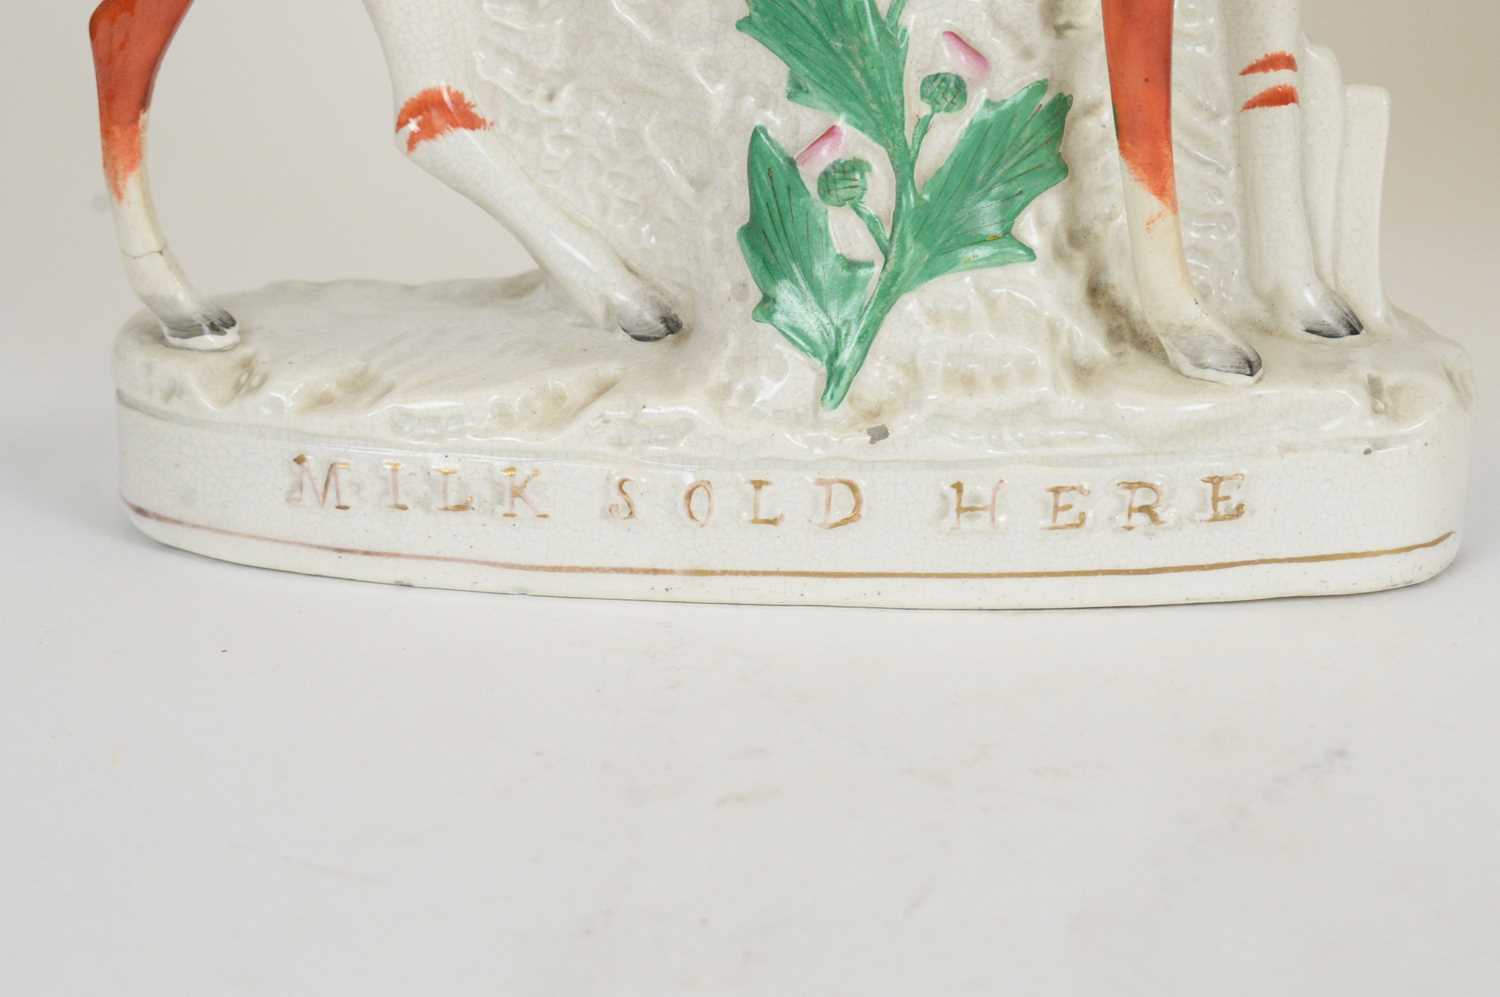 Pair of Staffordshire 'MILK SOLD HERE' cows - Image 7 of 7